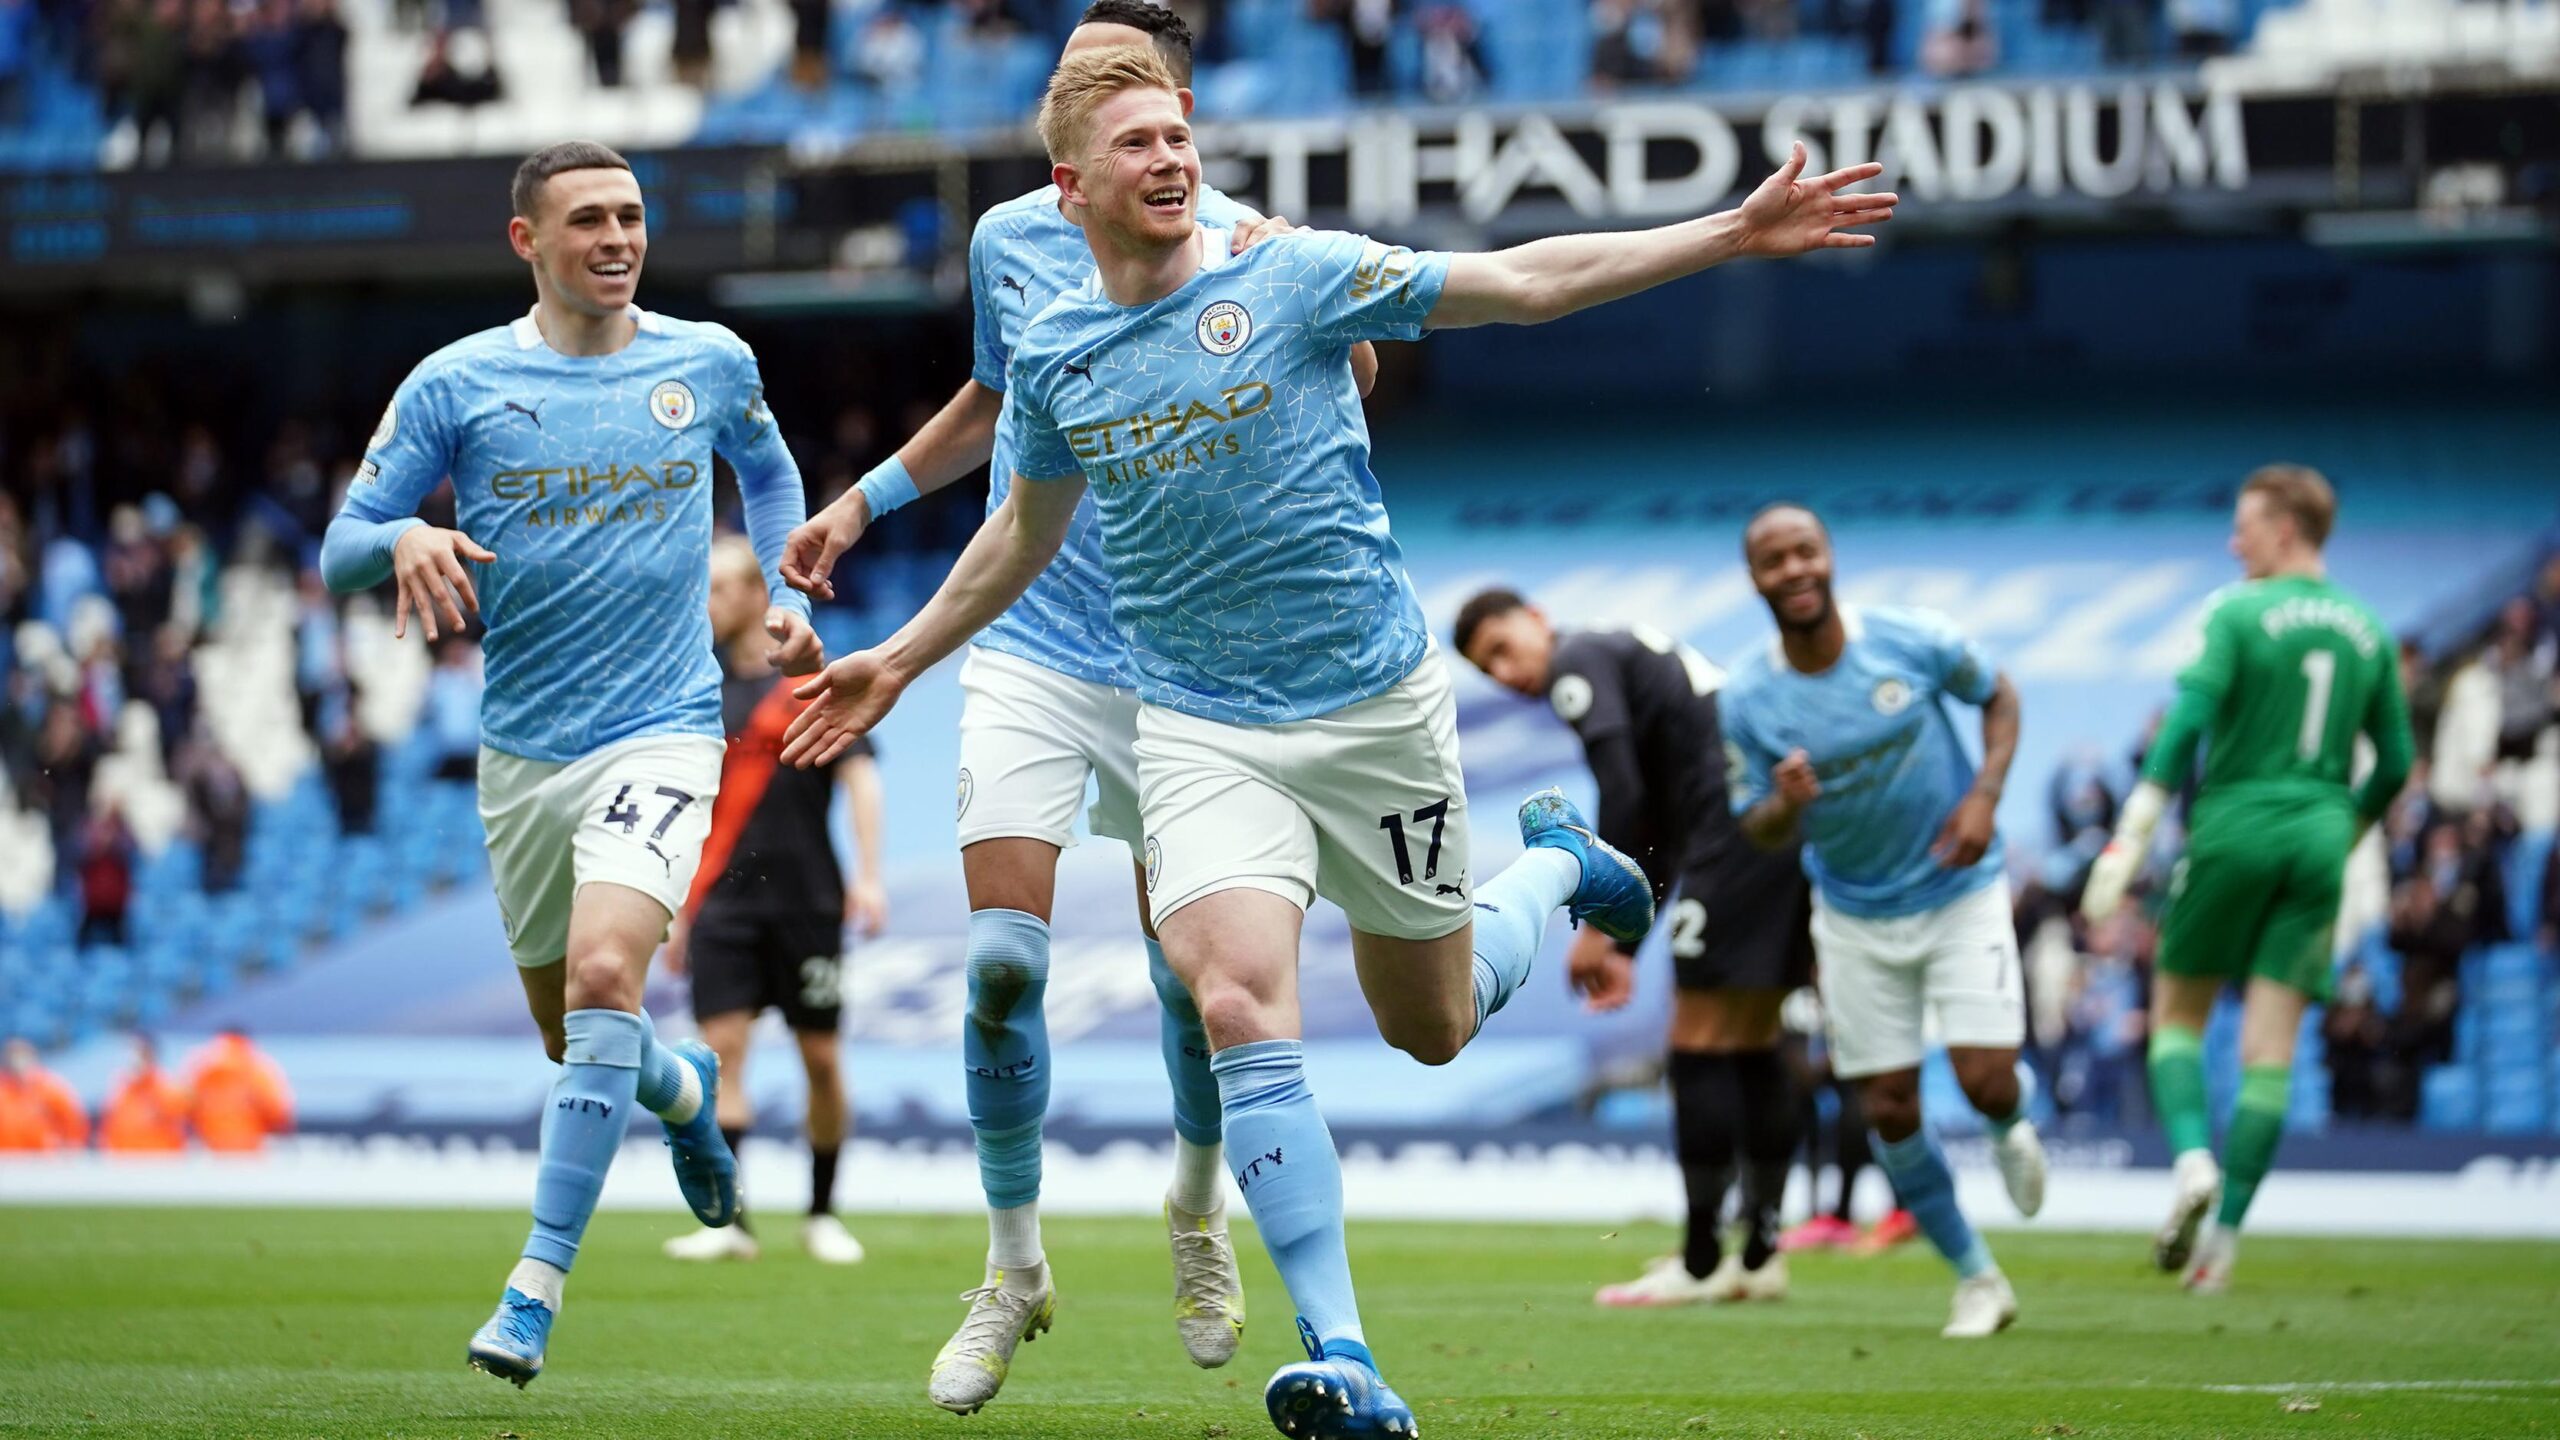 Manchester City's Kevin de Bruyne wins second award (Source: The Times)